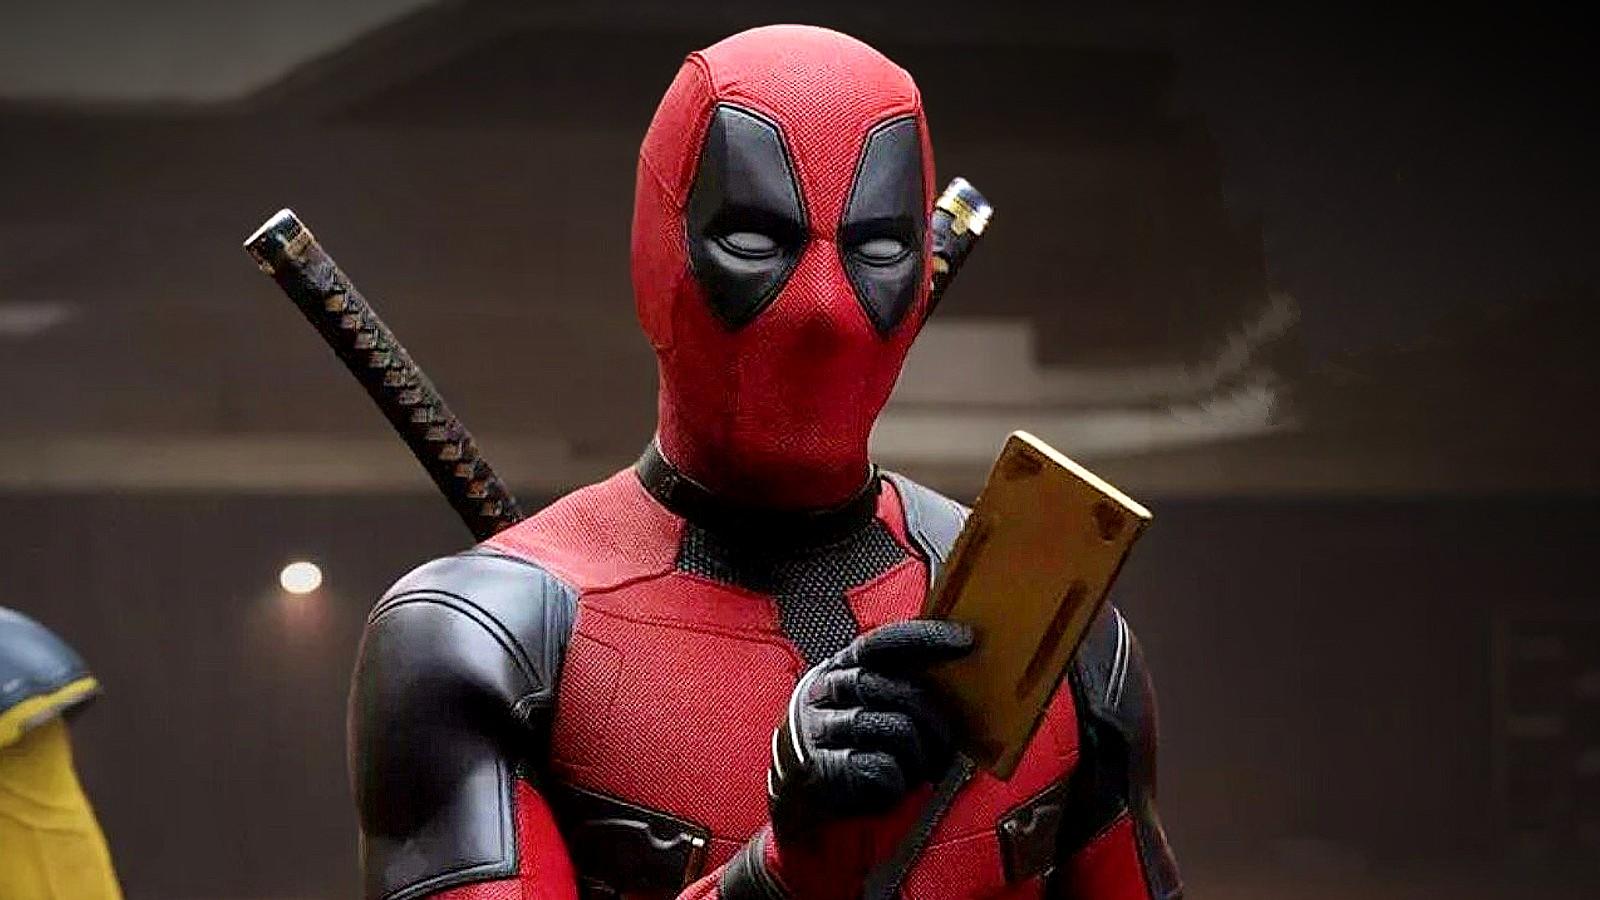 Deadpool with a TemPad in Deadpool and wolverine